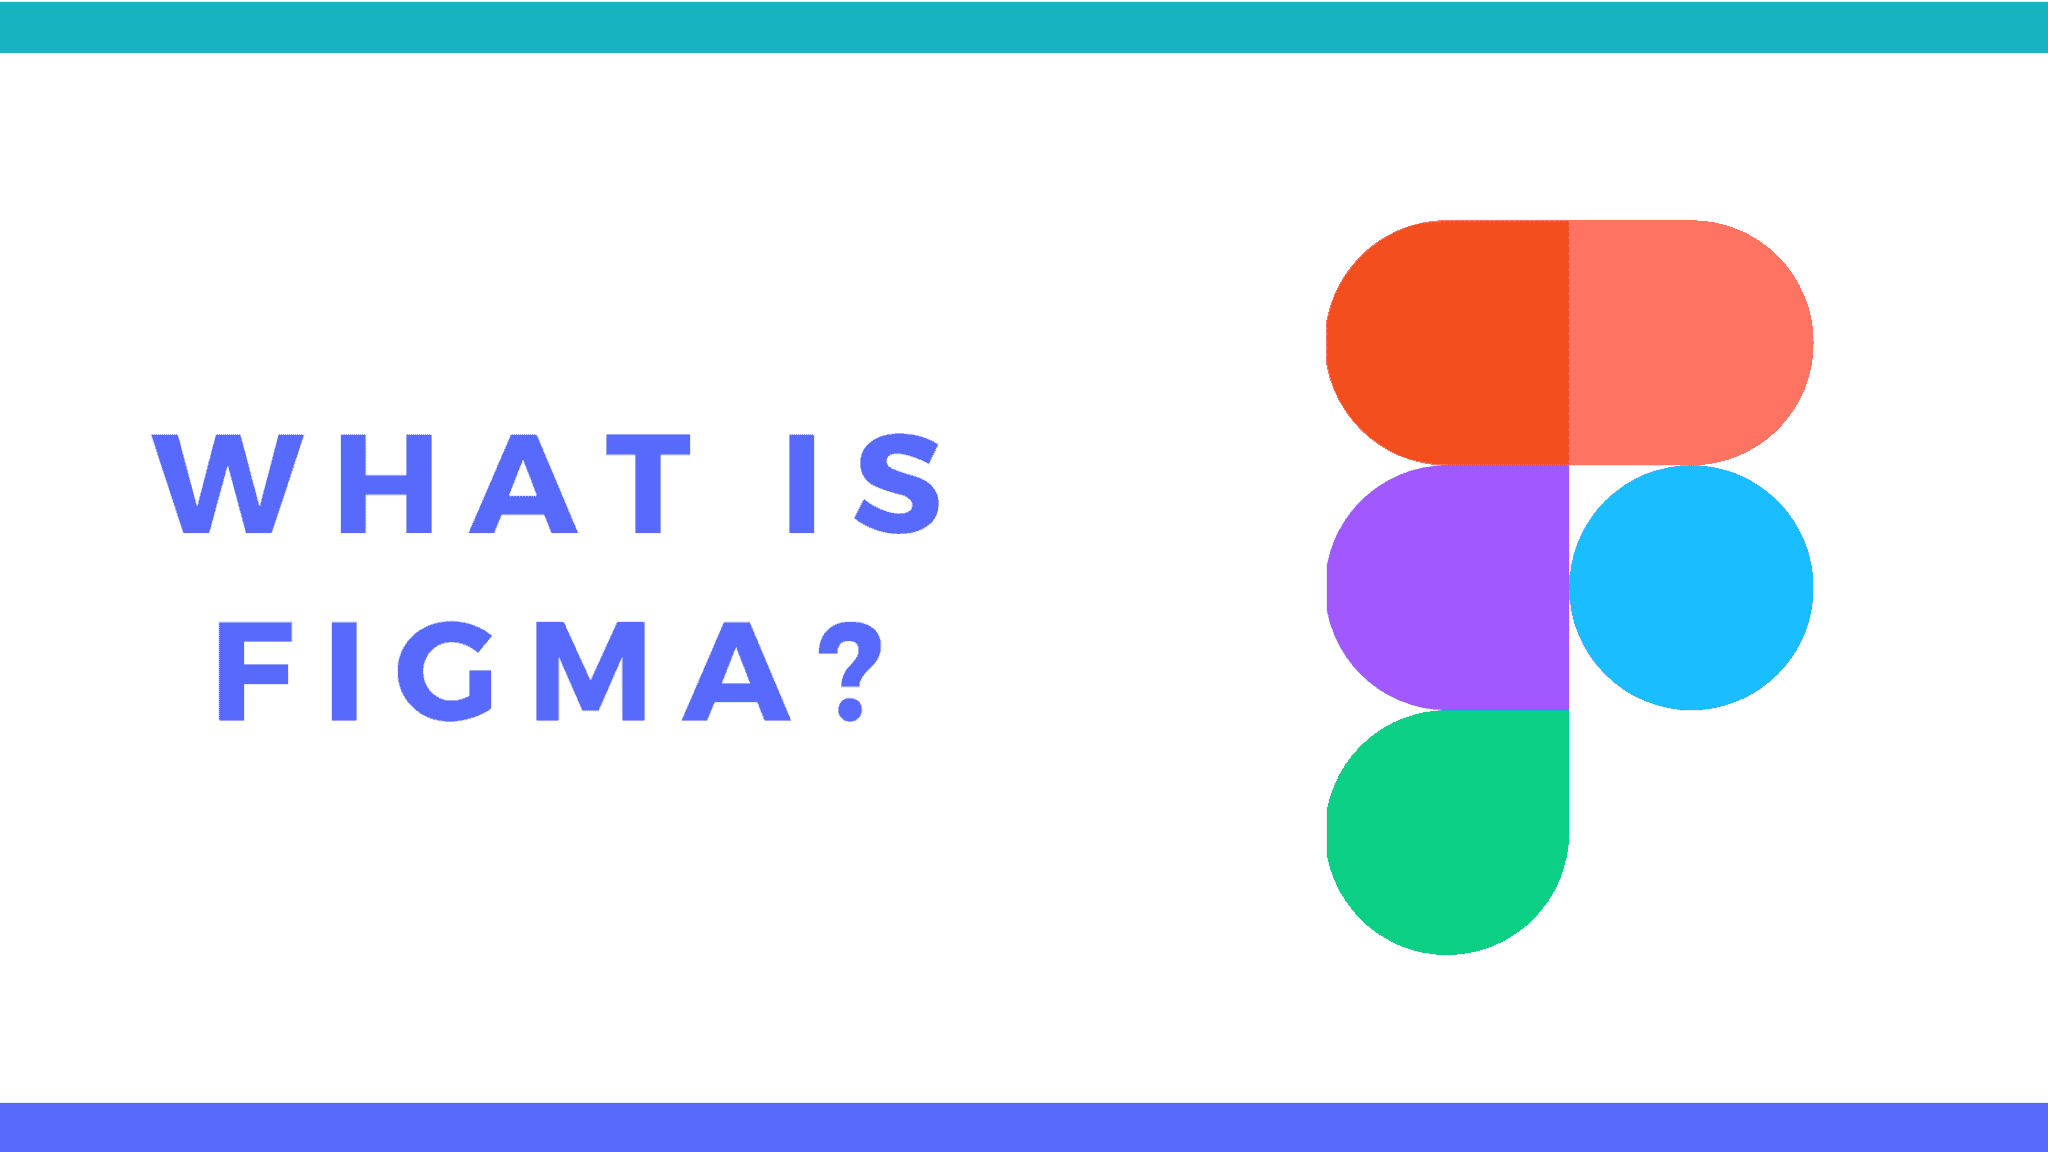 What is Figma?